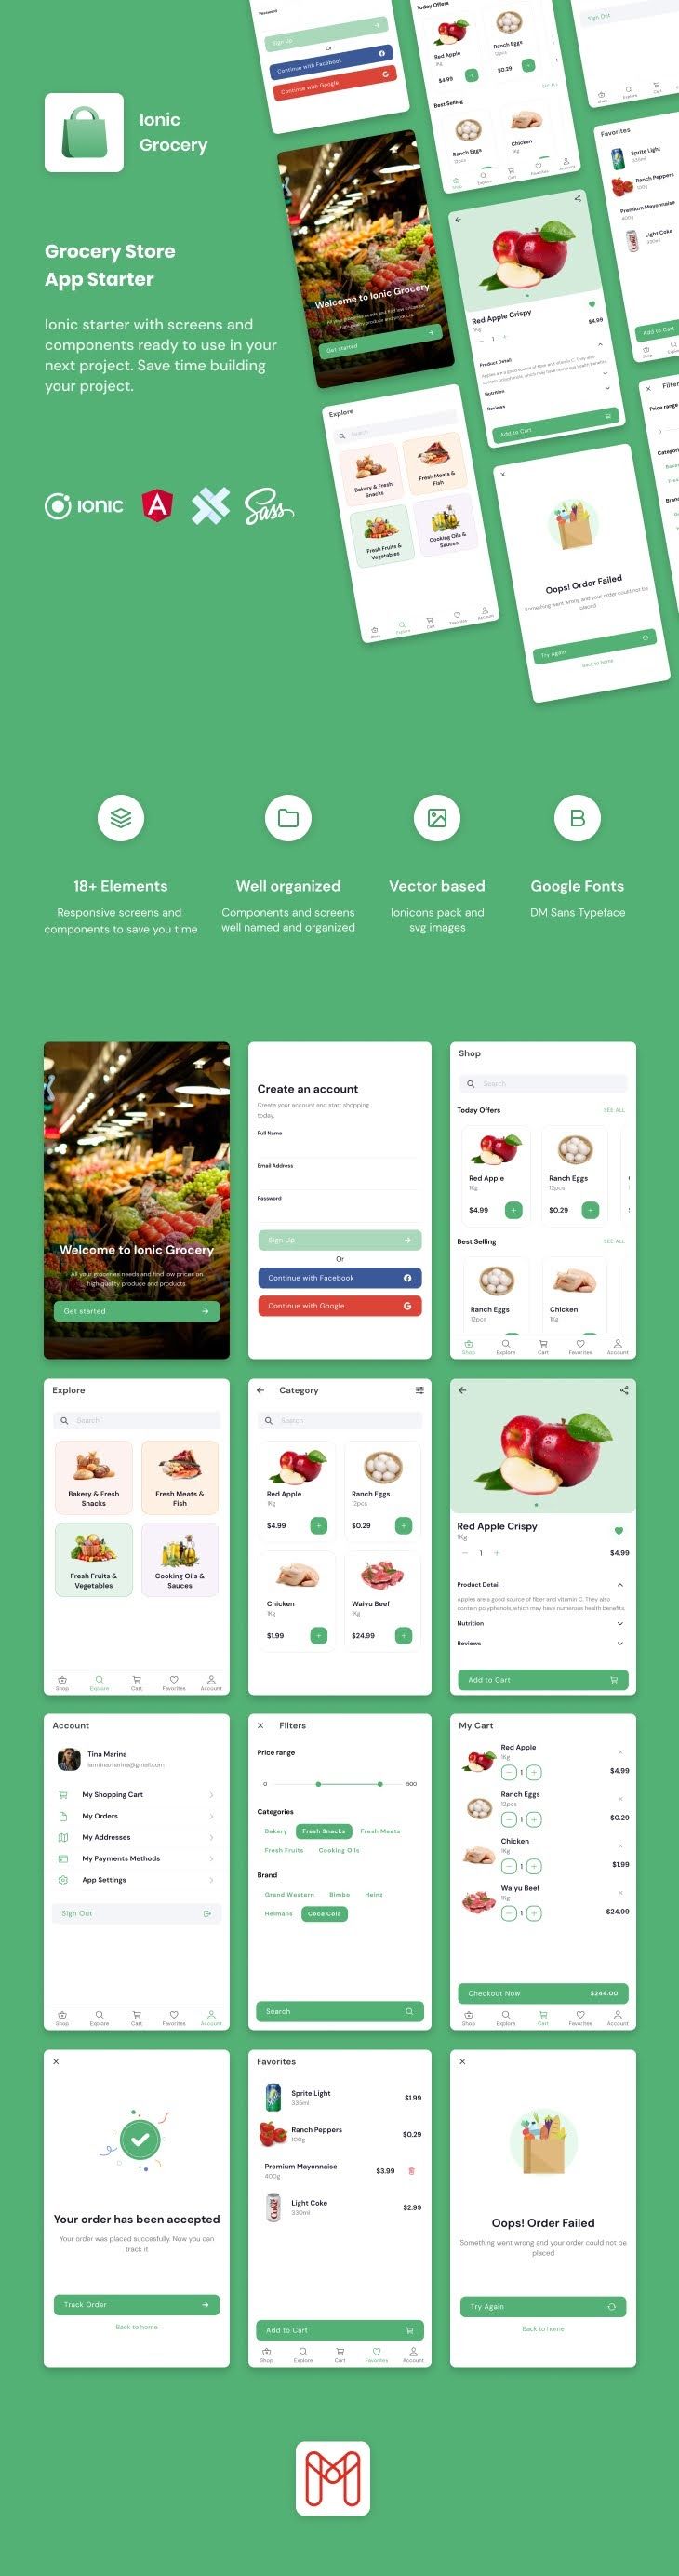 Ionic Grocery | Ionic 5 | Angular | UI Theme | Template App | Starter App & Components - 1